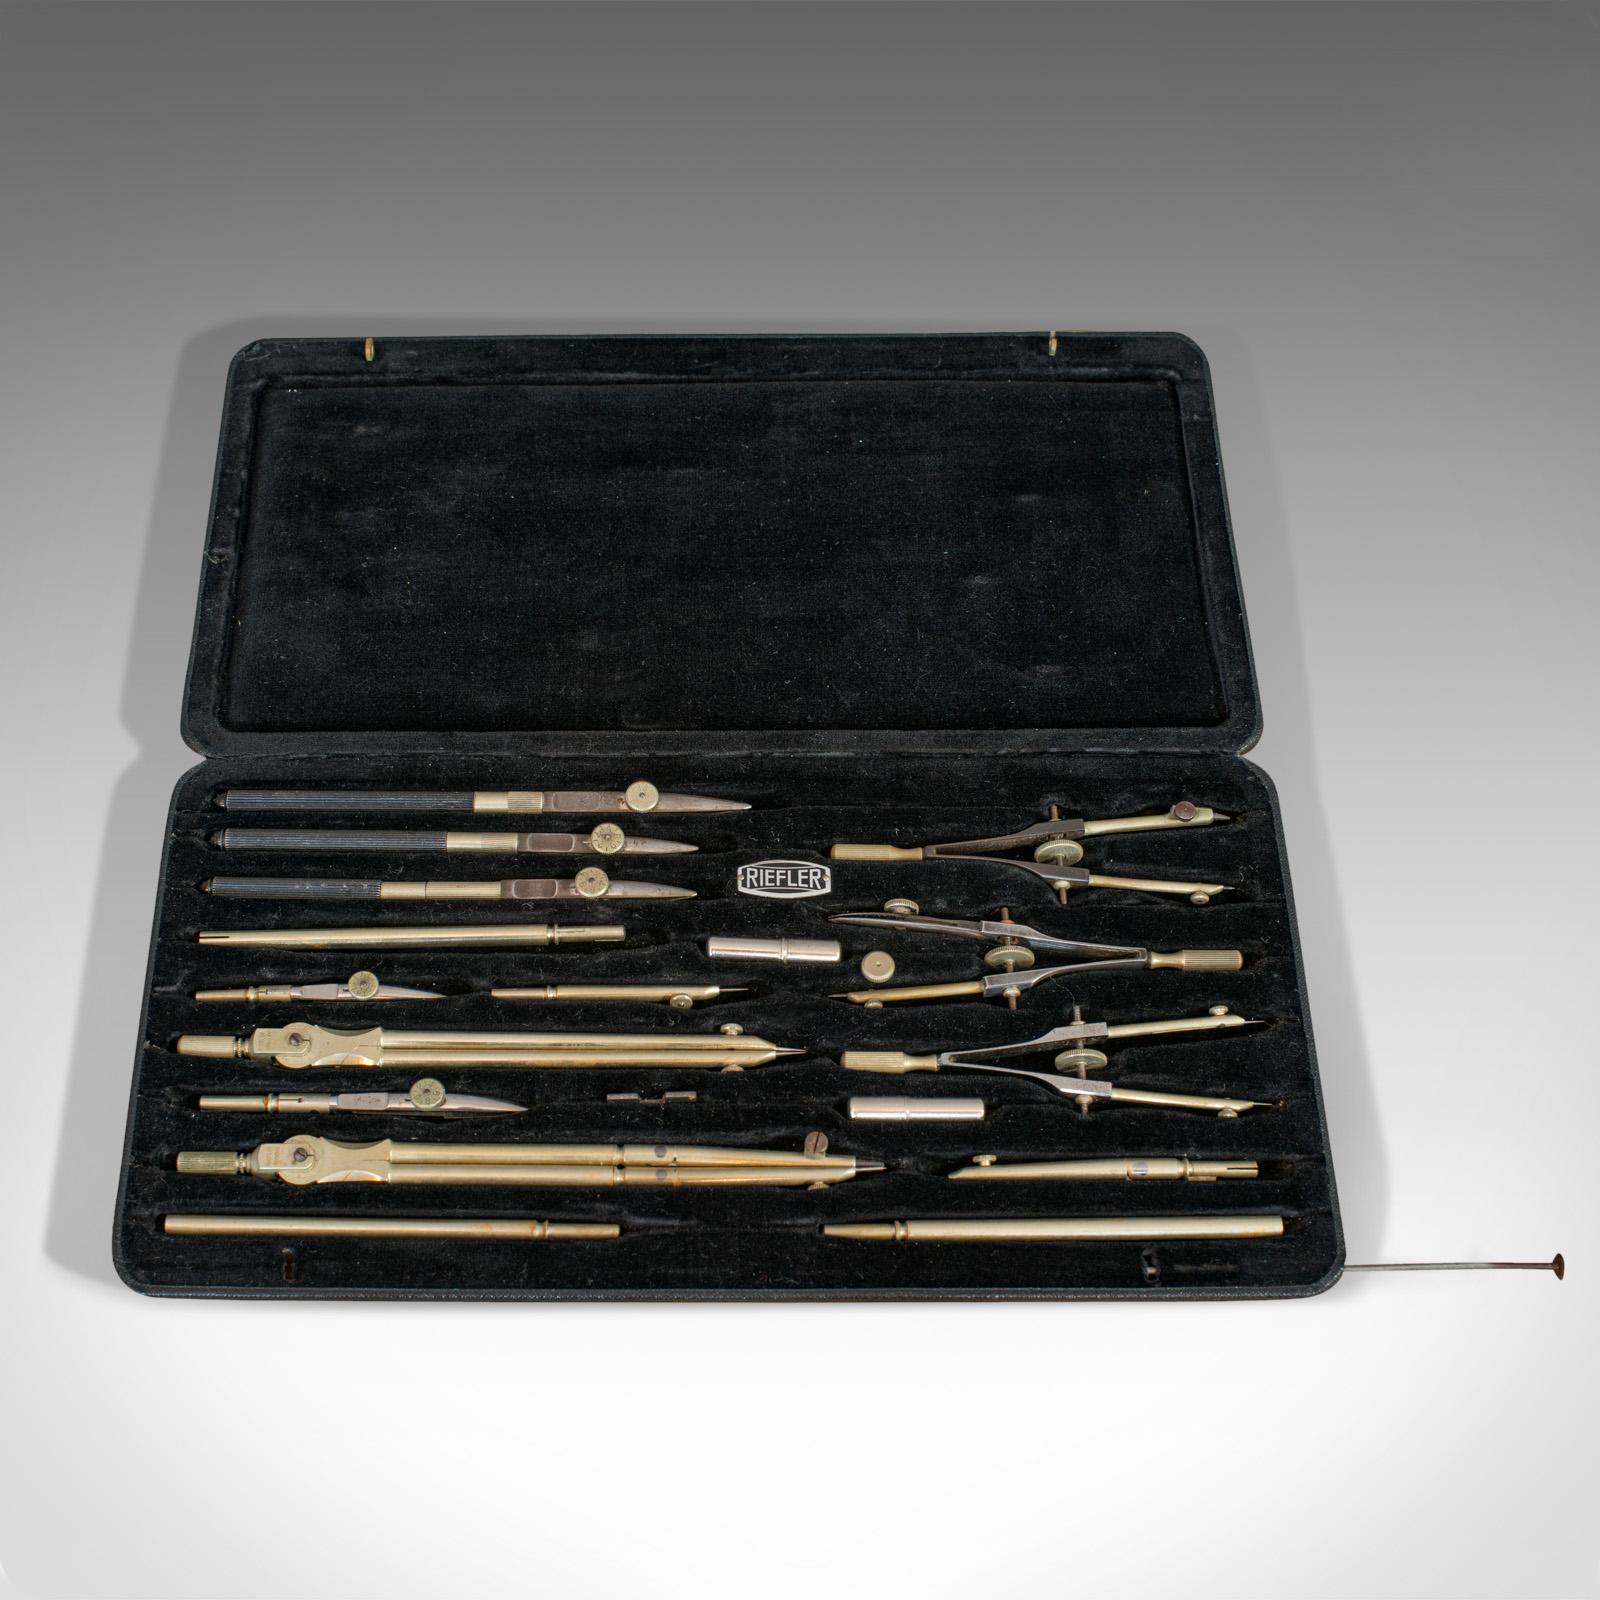 This is a vintage draughtsman's set. A German, nickel silver drawing instrument set by Riefler, dating to the mid-20th century, circa 1950.

Nineteen-piece instrument set
Displays a desirable aged patina
Silver nickel tools in good